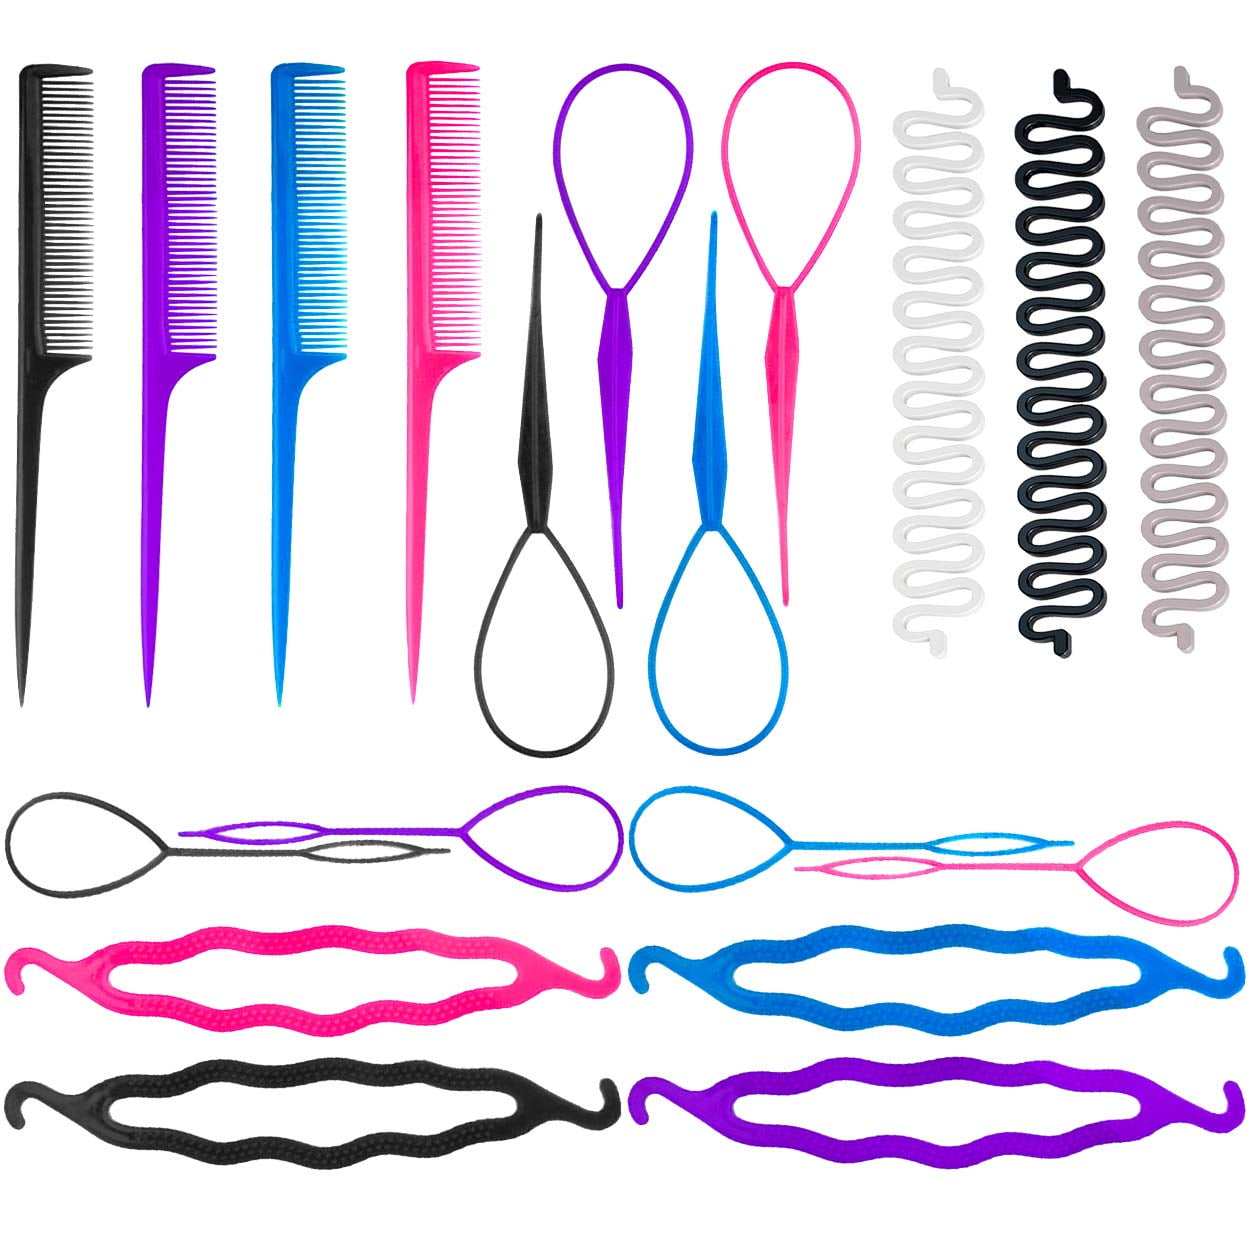 2 Pairs Hair Tail Tools, Hair Braid Accessories,French Braid Tool Loop for  Hair Styling, 2 pcs, 2 Colors